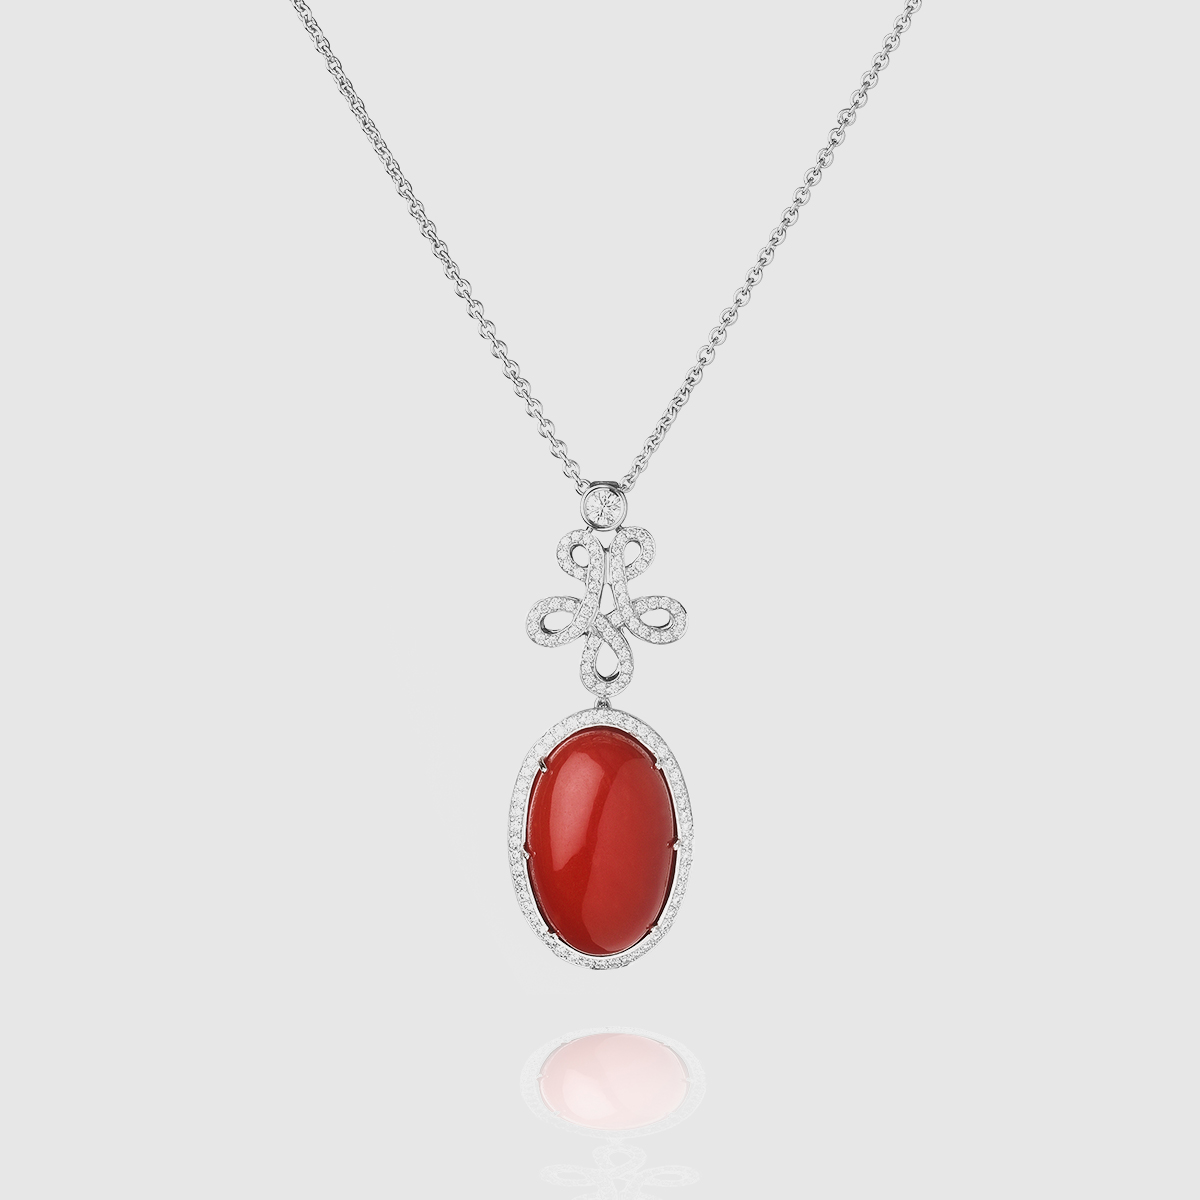 Necklace in white Gold with round Diamonds and  Japanese Moro Coral